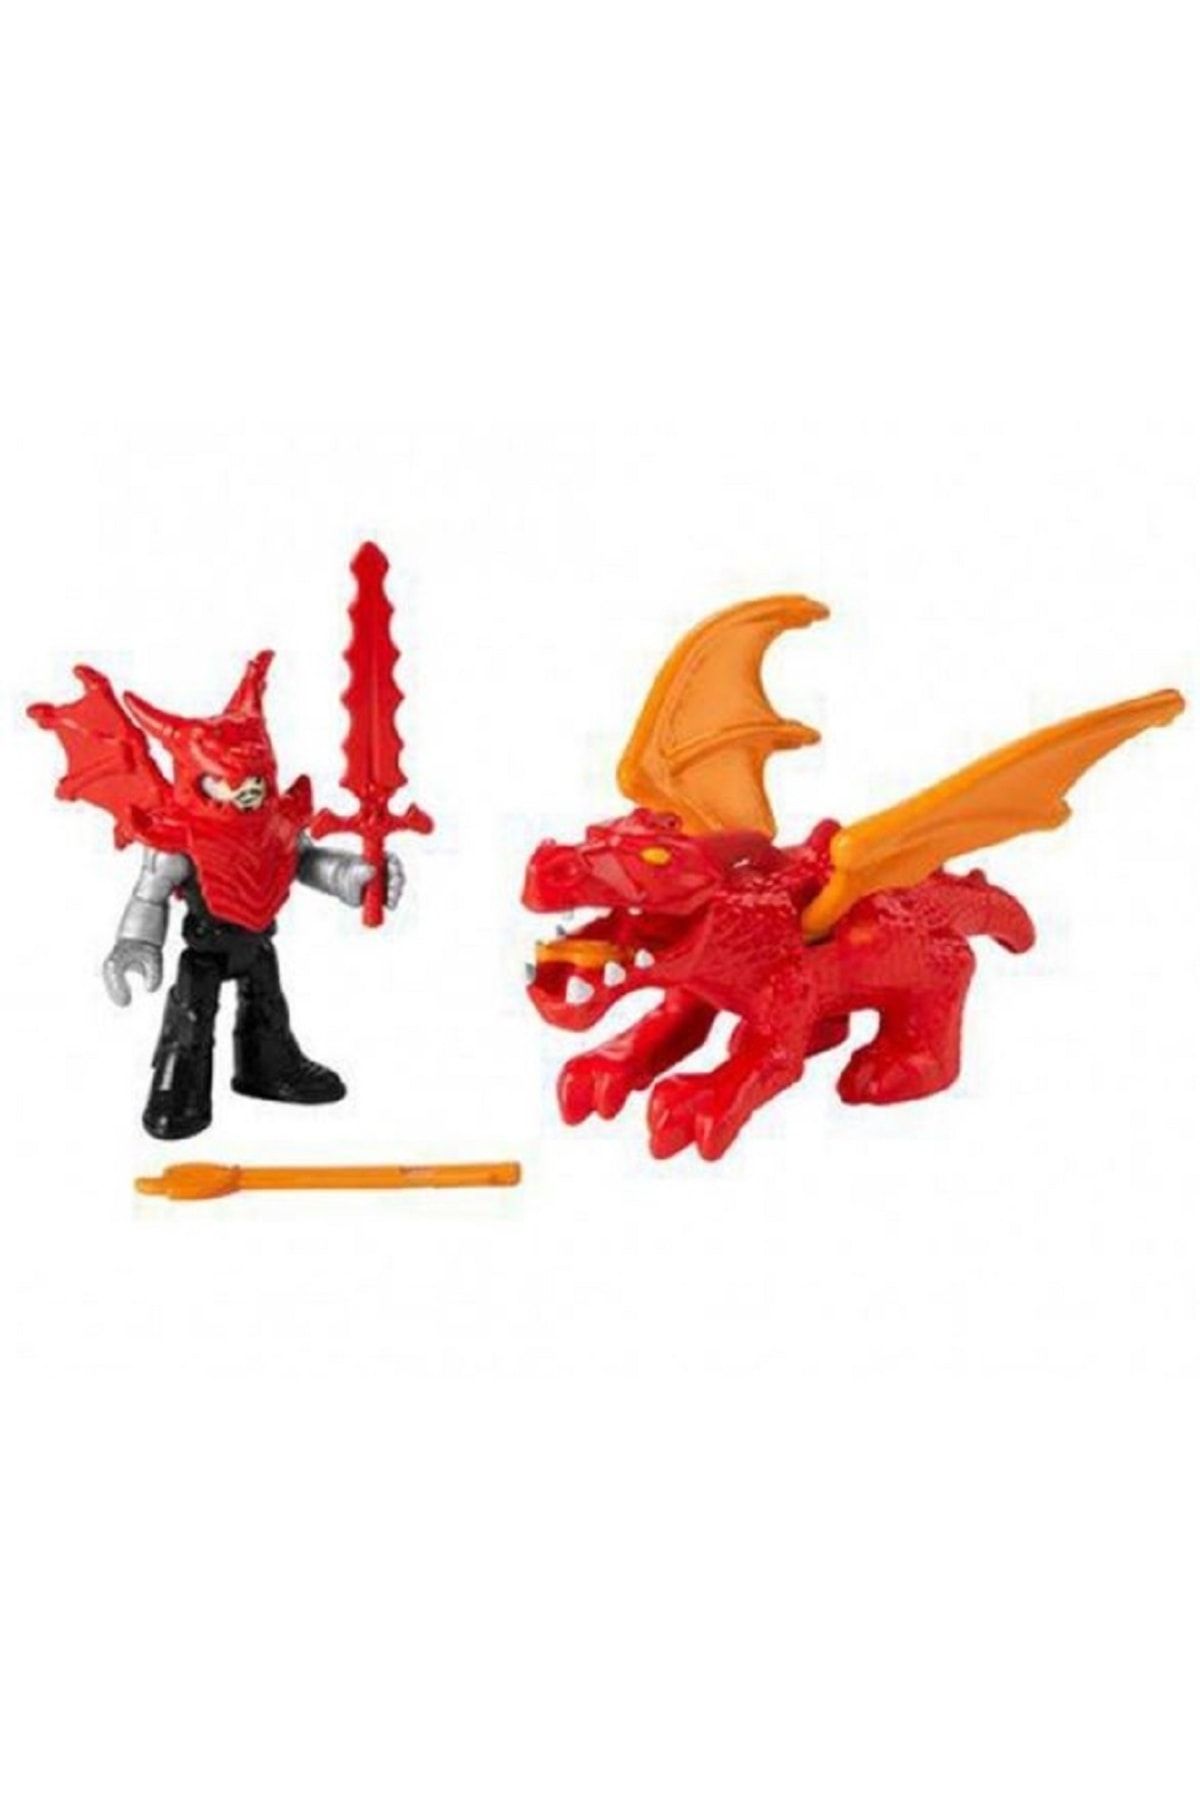 Fisher Price Imaginext Warrior Set Special Edition